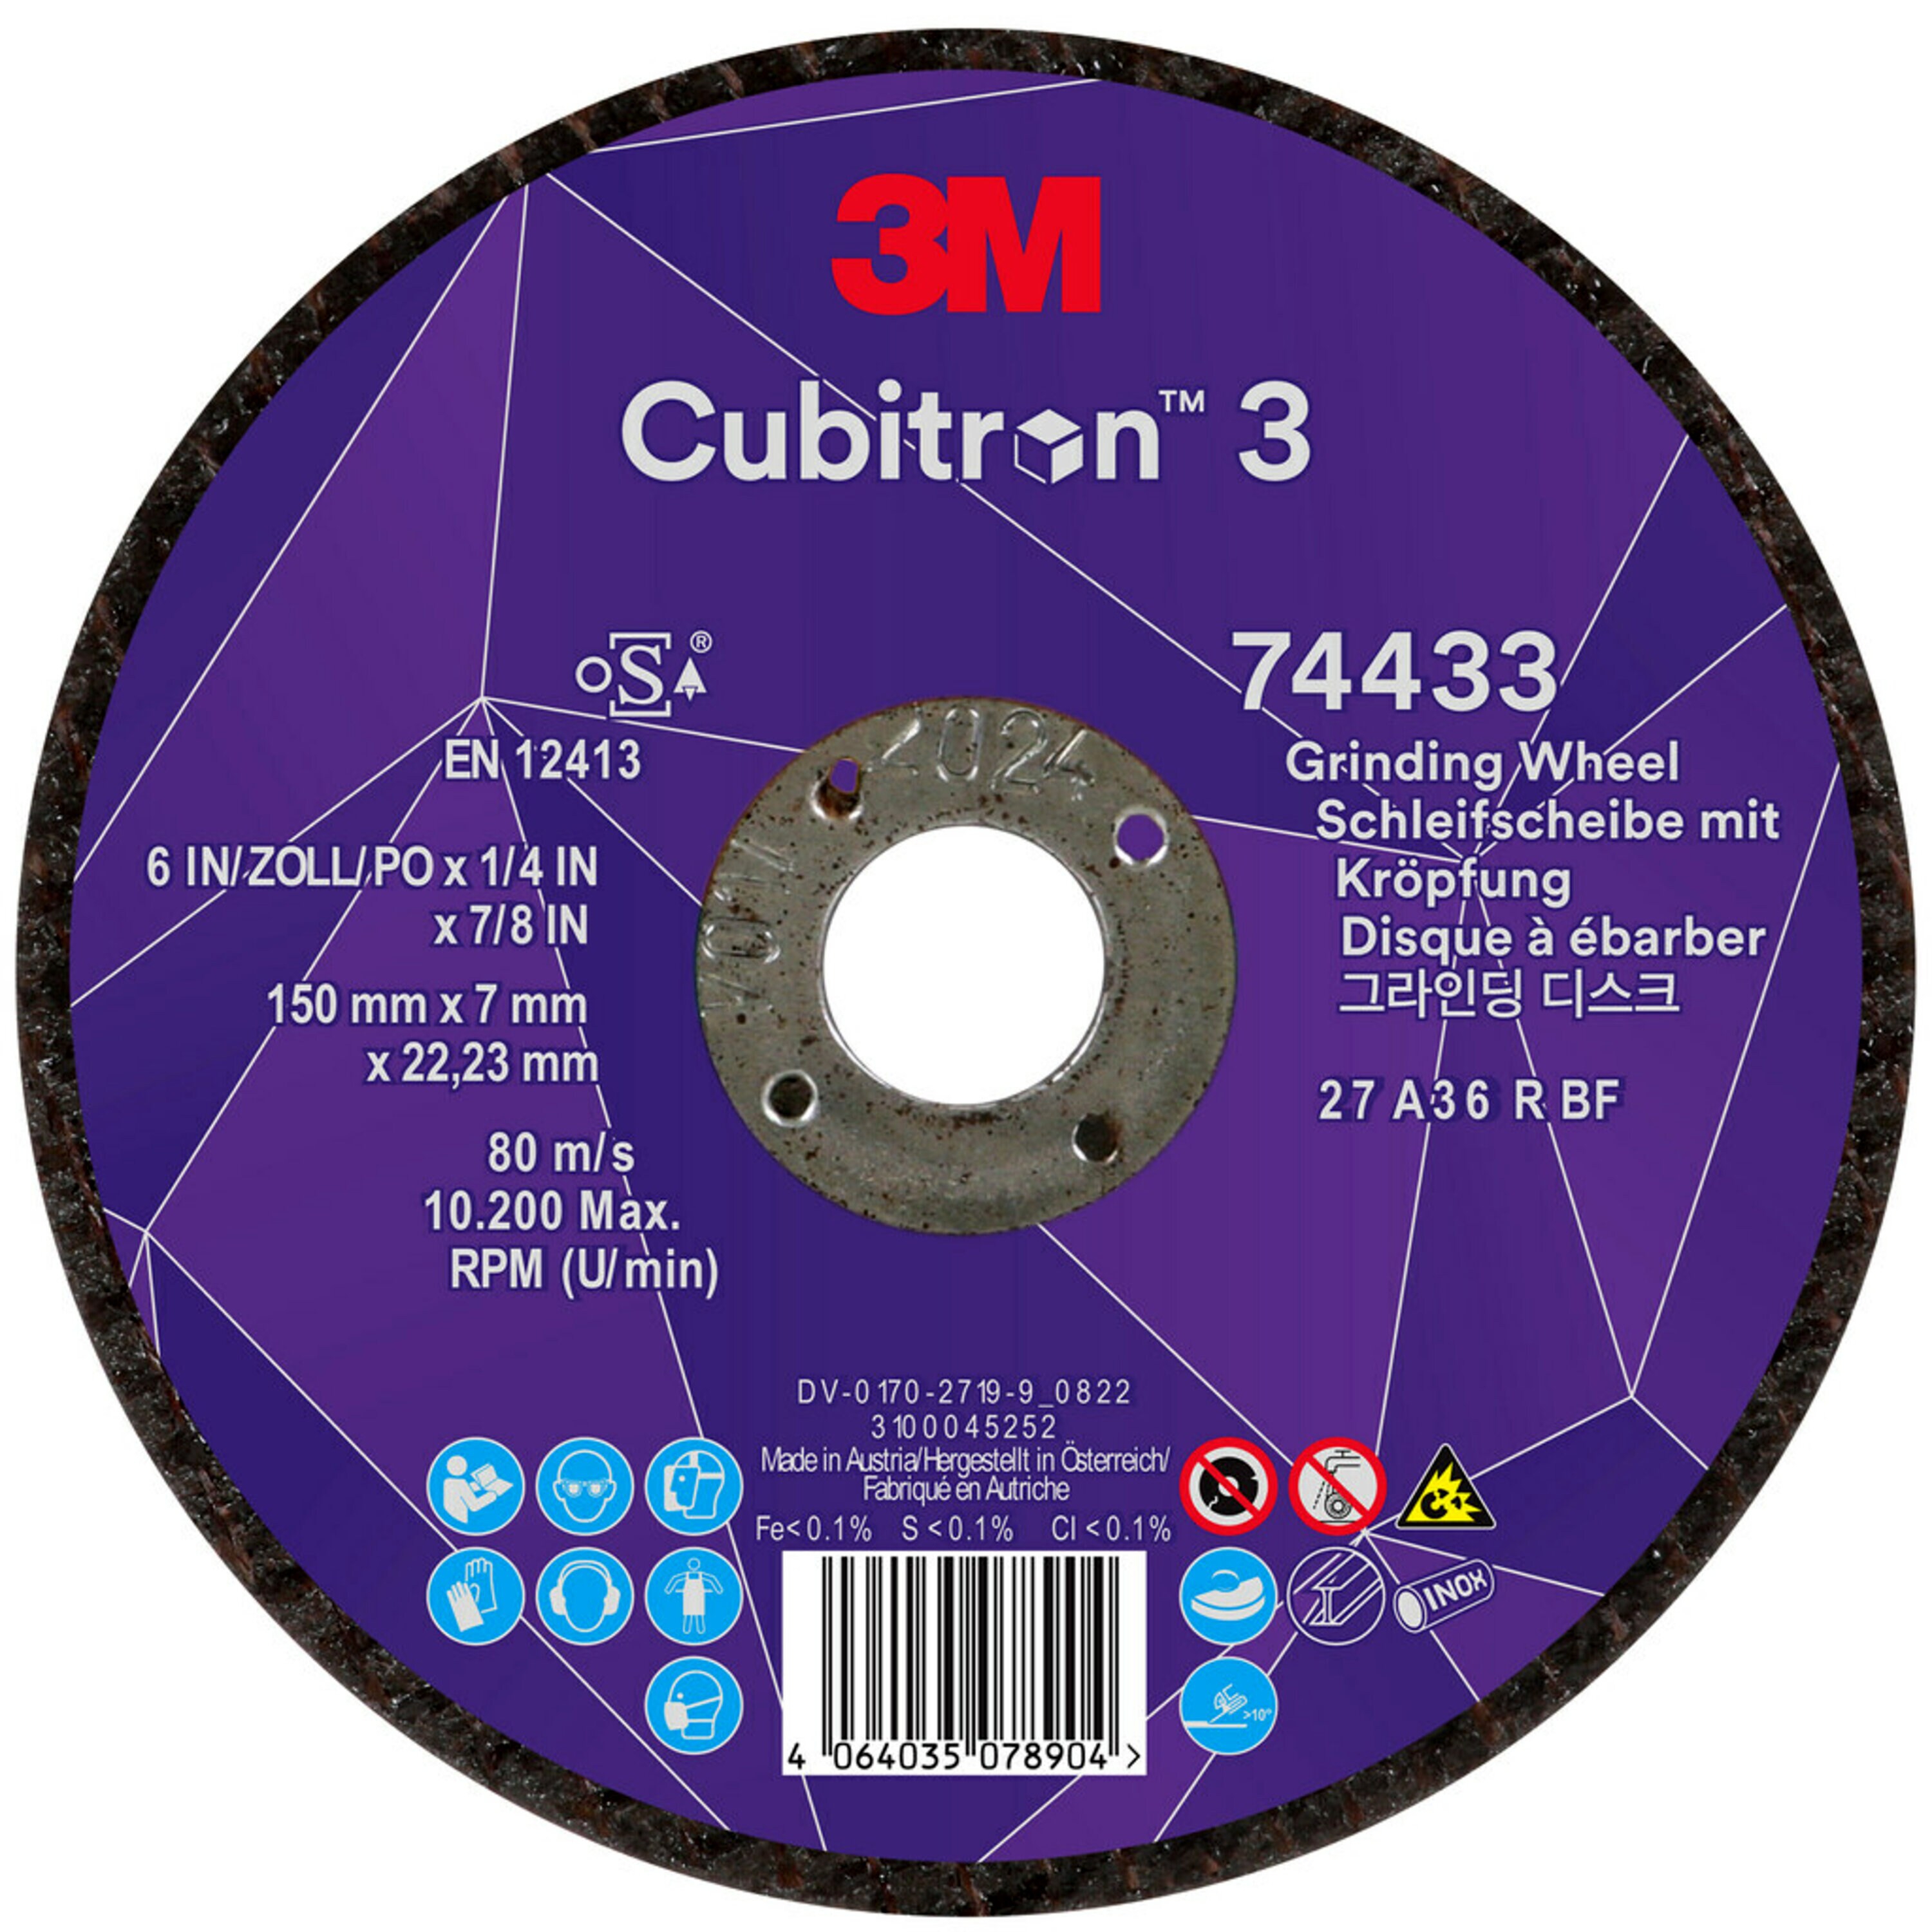 3M Cubitron 3 grinding disc, 150 mm, 7.0 mm, 22.23 mm, 36 , type 27, especially for gouging # 74433